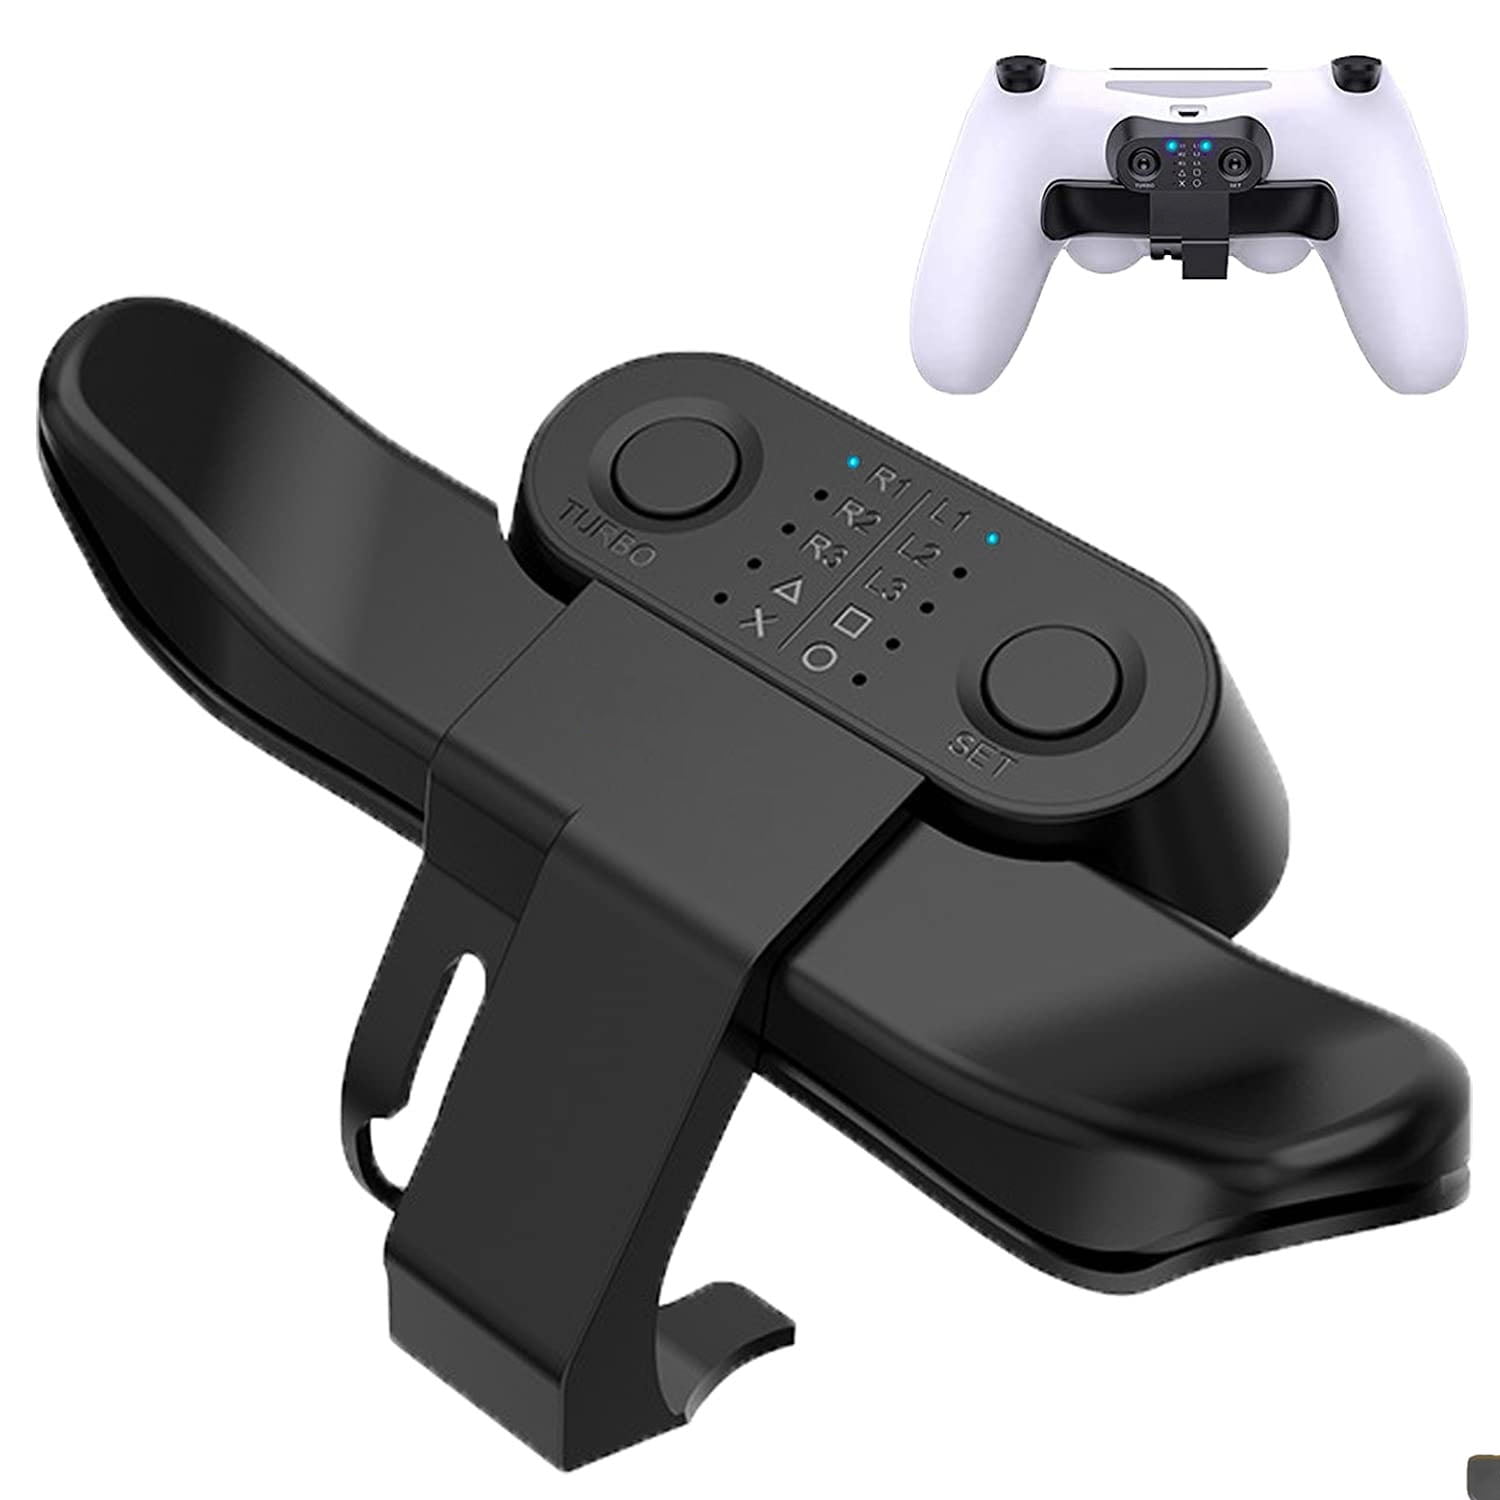 Guggenheim Museum Pine en kop Paddles For Ps4 Controller, X-Gun Back Button Attachment For Playstation 4,  Controller Paddles For Ps4, Turbo Function/Memory Function/Plug And Play,  Suitable For Ps4 Handles - Walmart.com